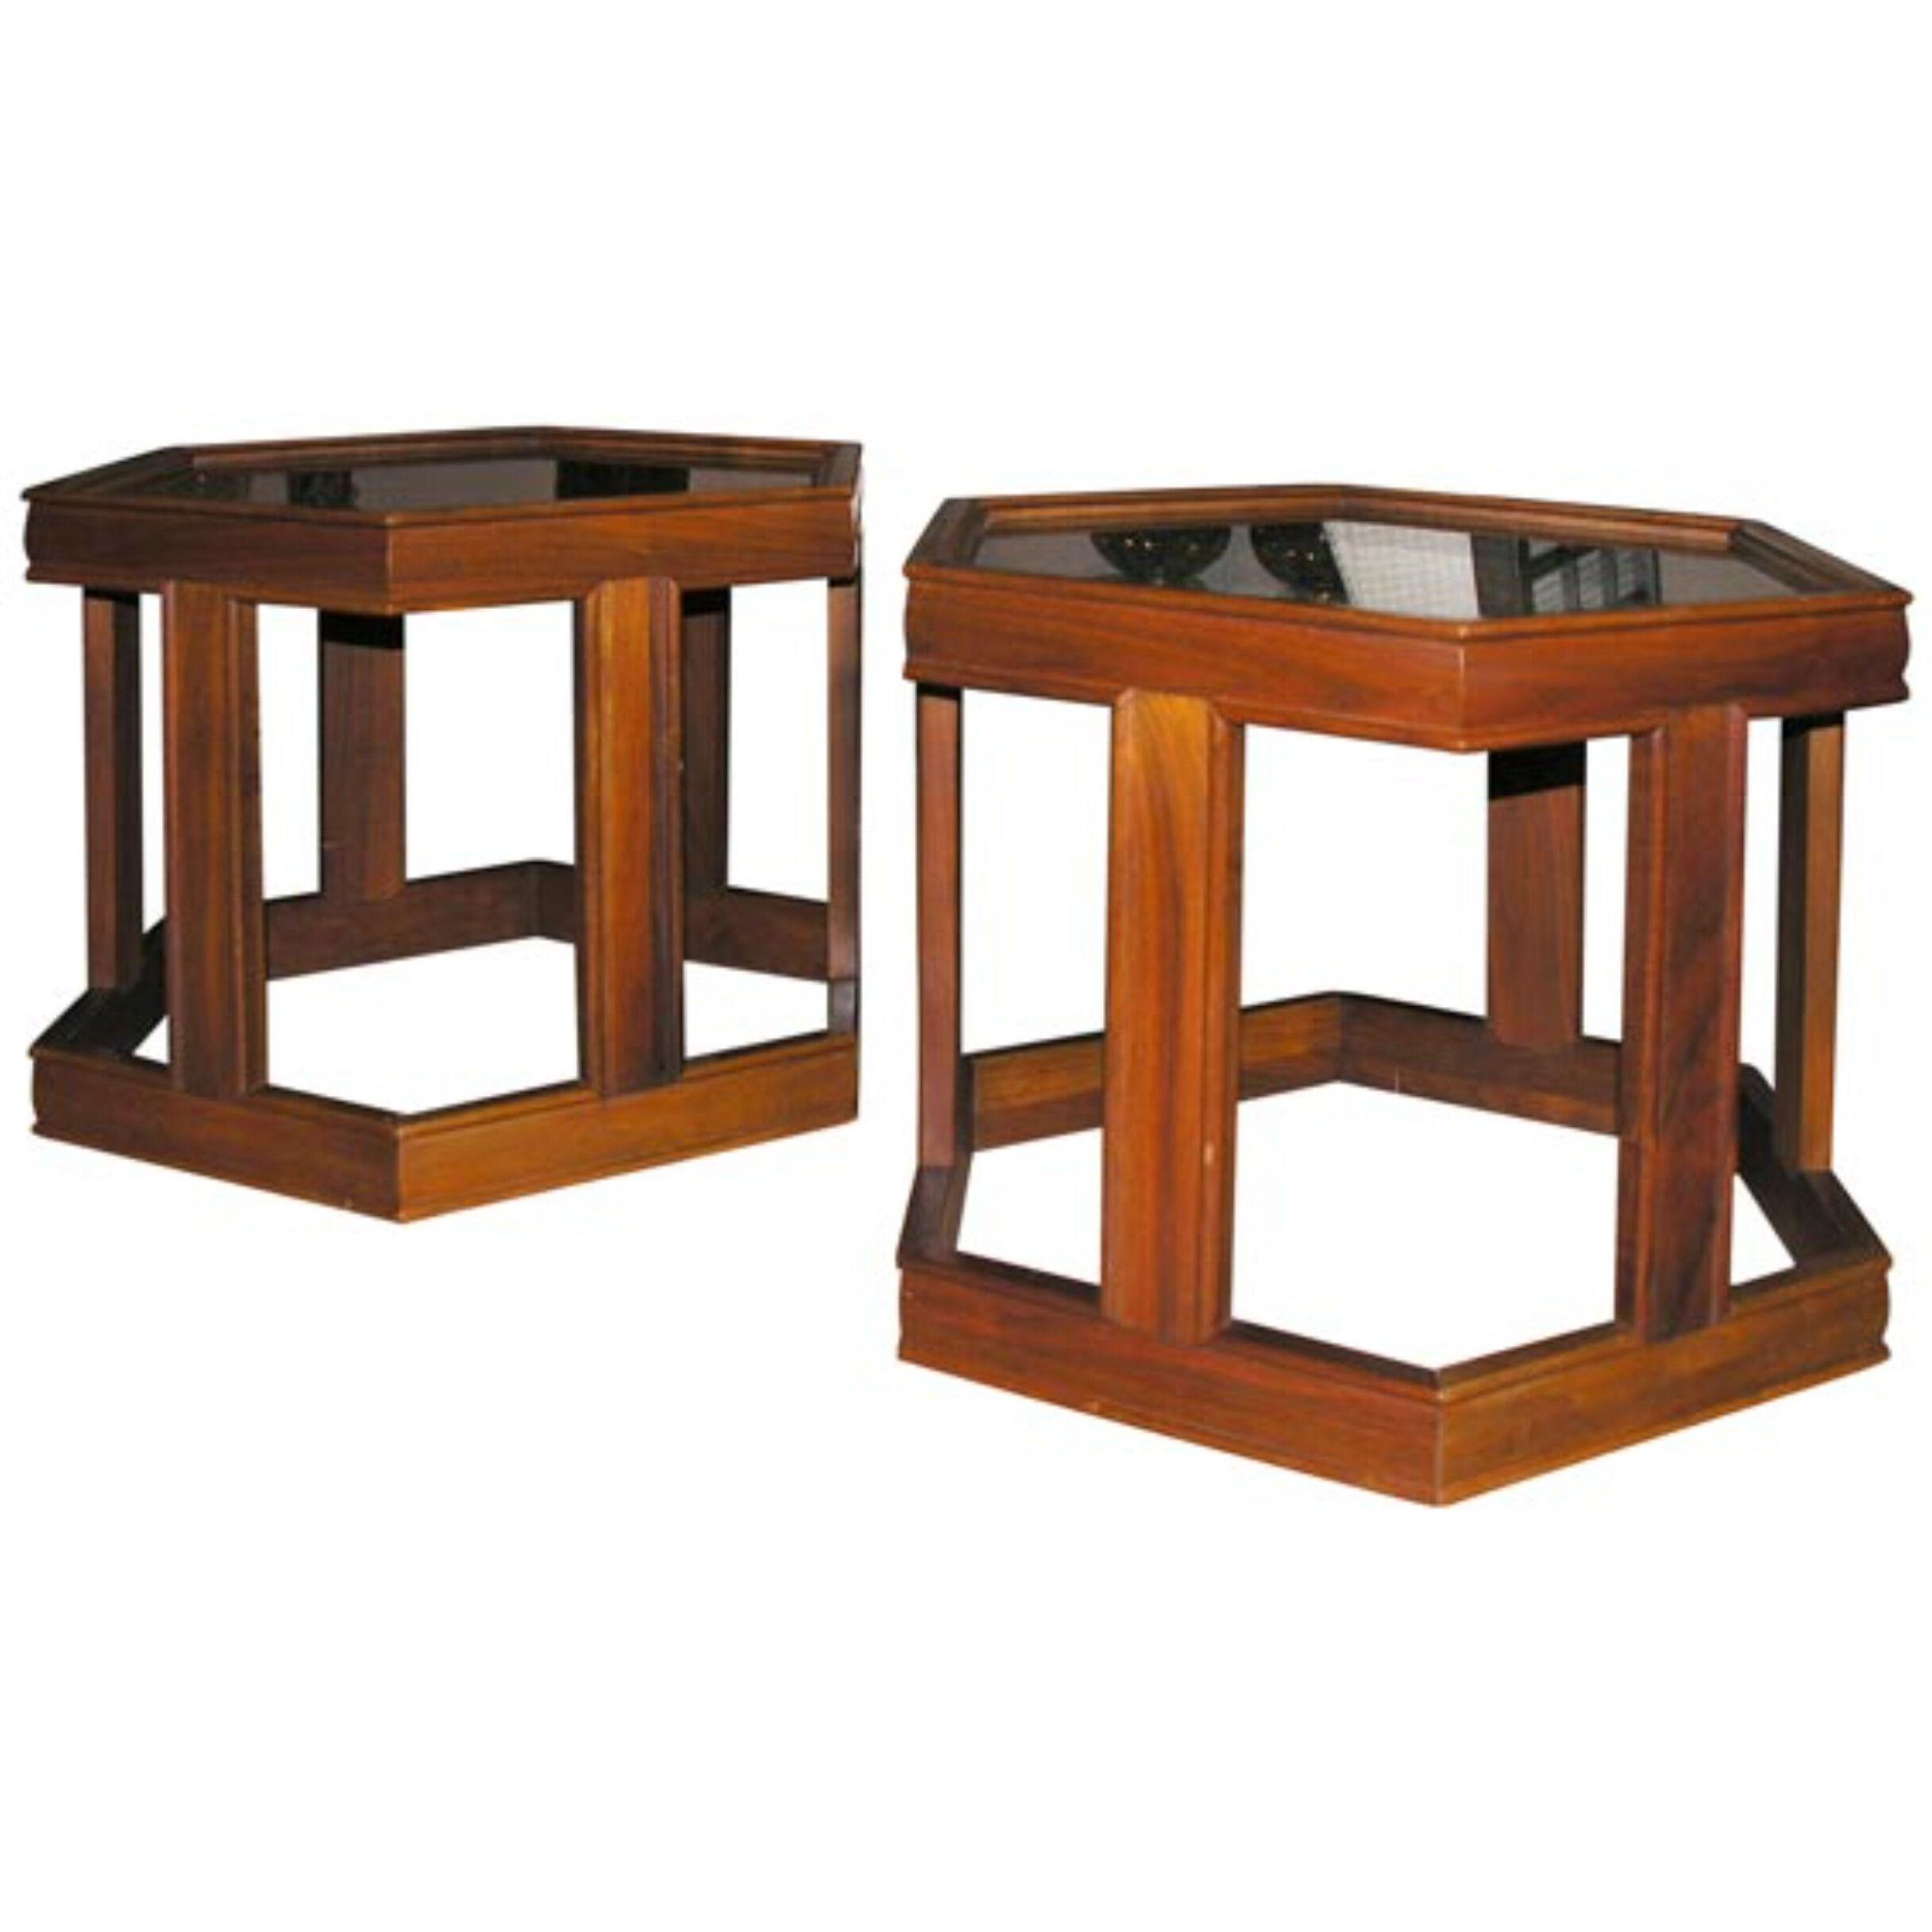 Group of Six Octagonal Occasional Tables from Brown Saltman